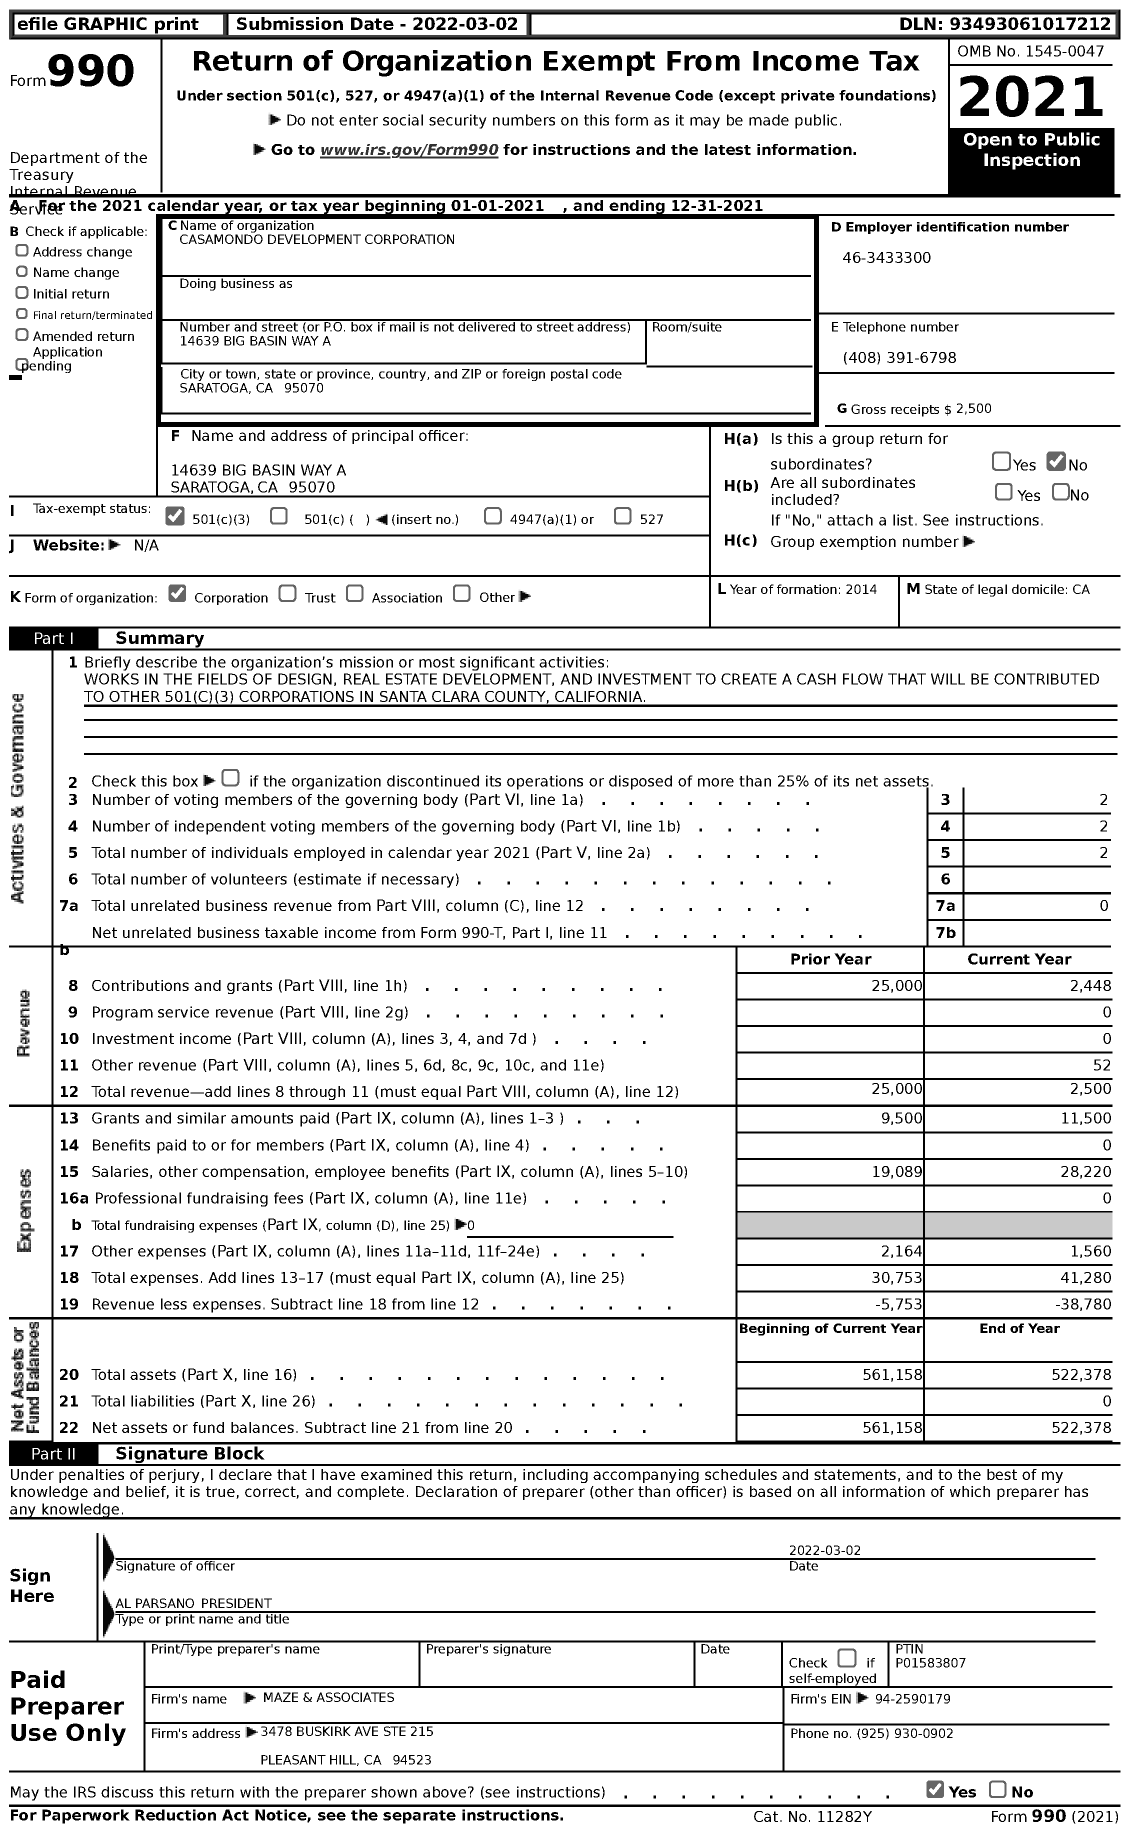 Image of first page of 2021 Form 990 for Casamondo Development Corporation